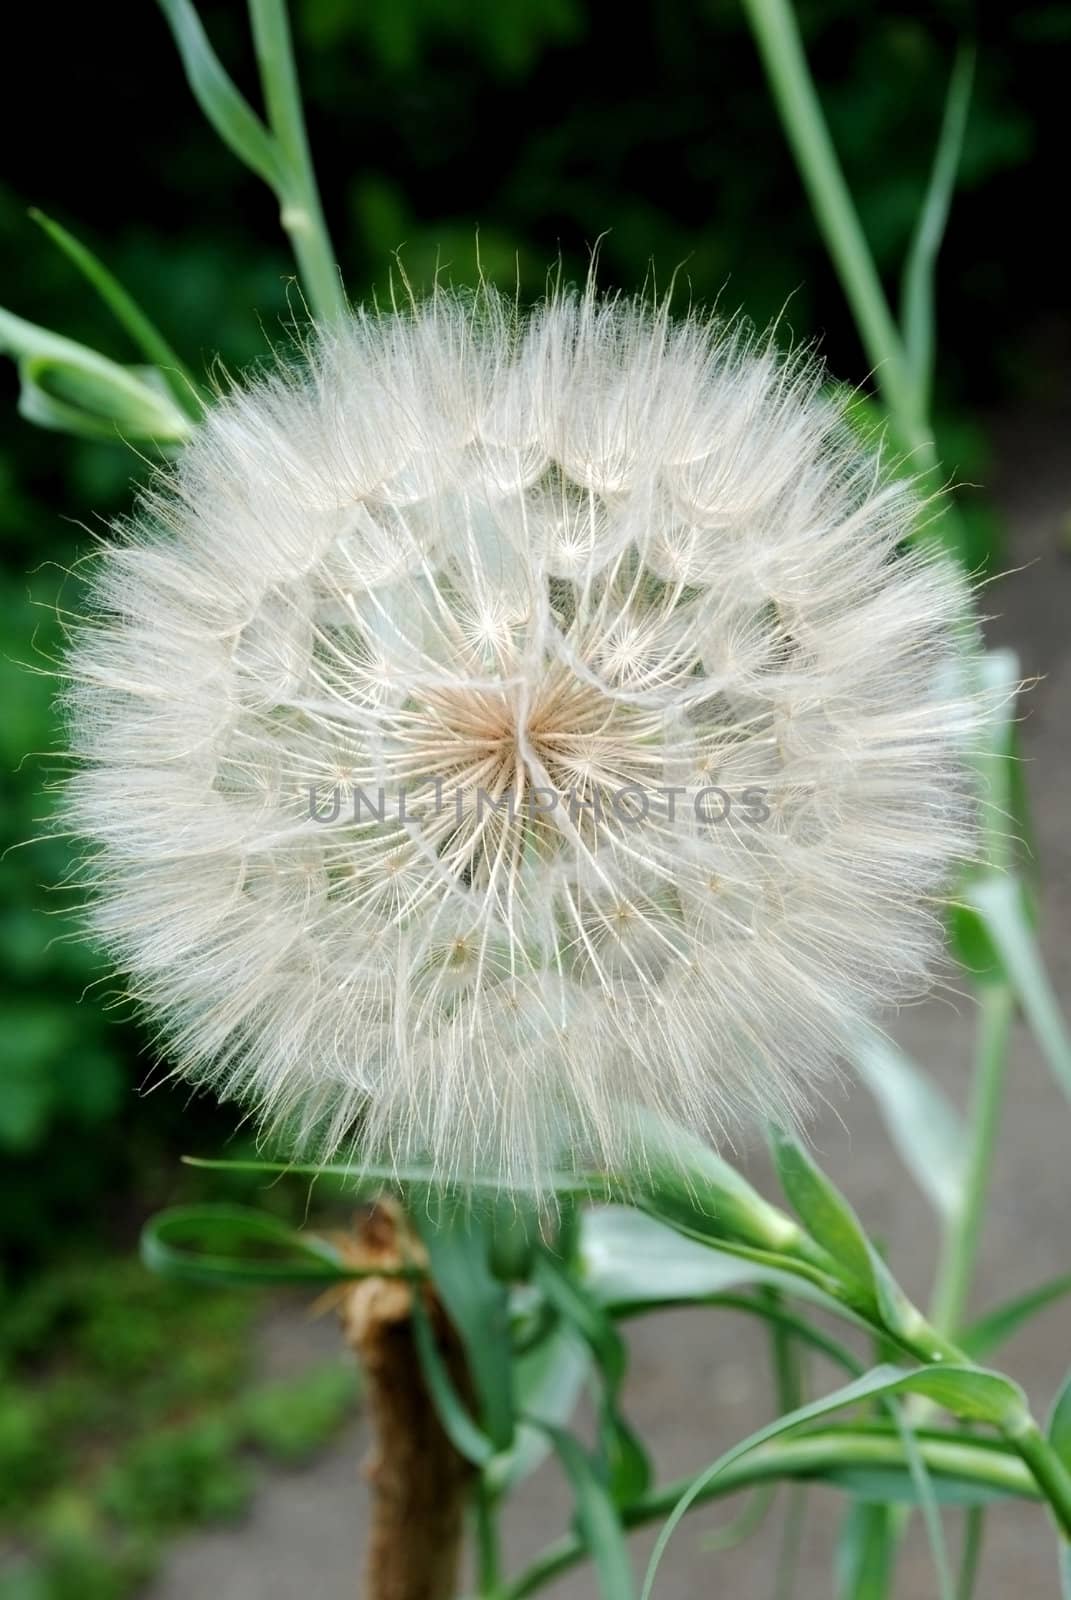 The white and big dandelion blossoming in a garden in loneliness